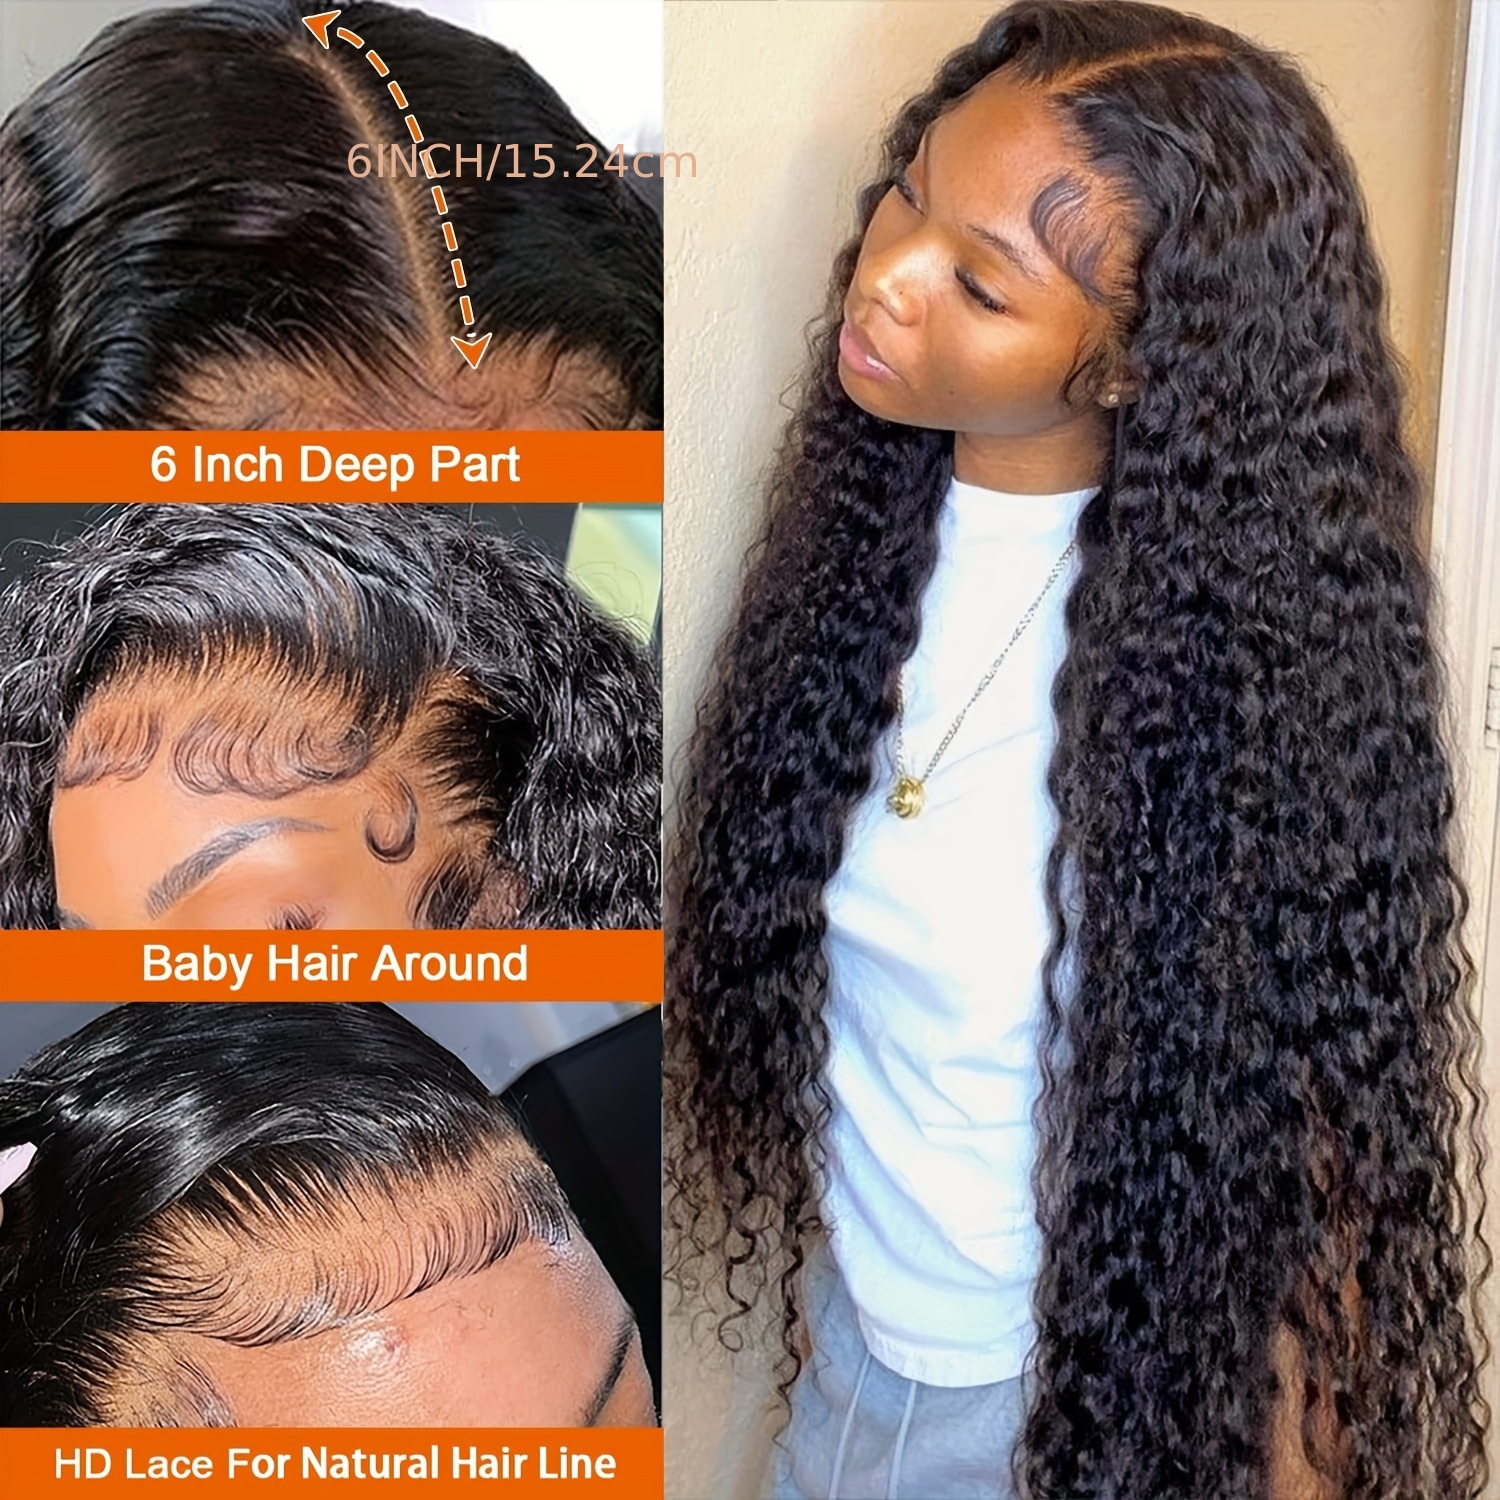 Sunday Hair Brazilian Virgin Human Hair Swiss Lace Top Closure 12inch,  Bleached Knots Edge Finished Lace Closure 3Part Closure